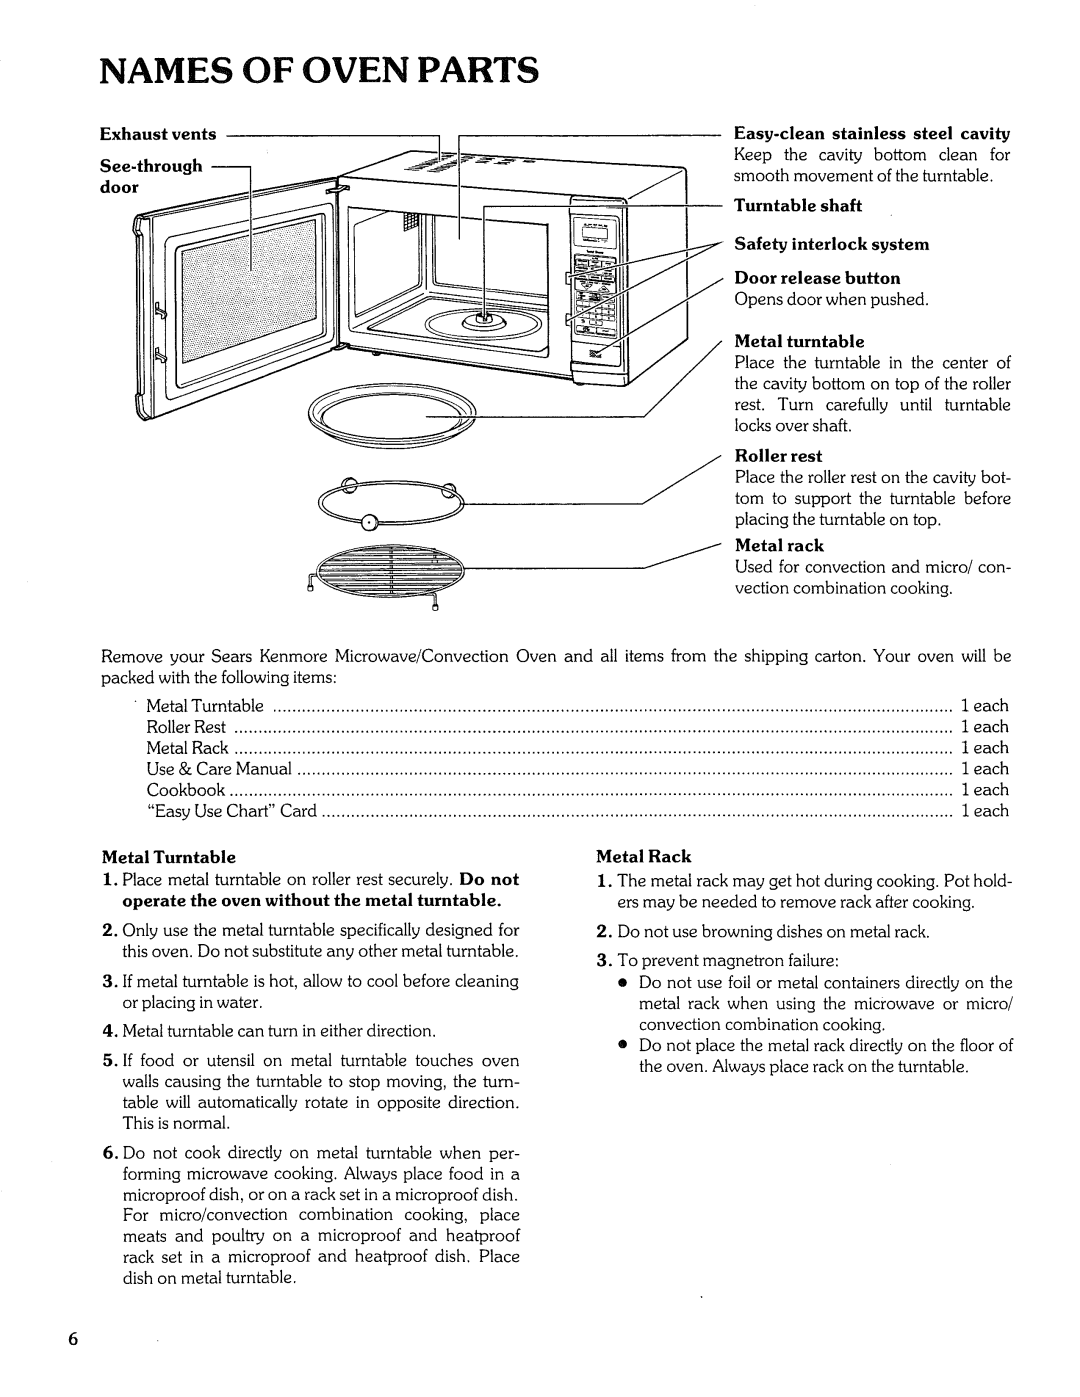 Sears Microwave Oven manual Names Of Oven, Parts, Exhaust vents 